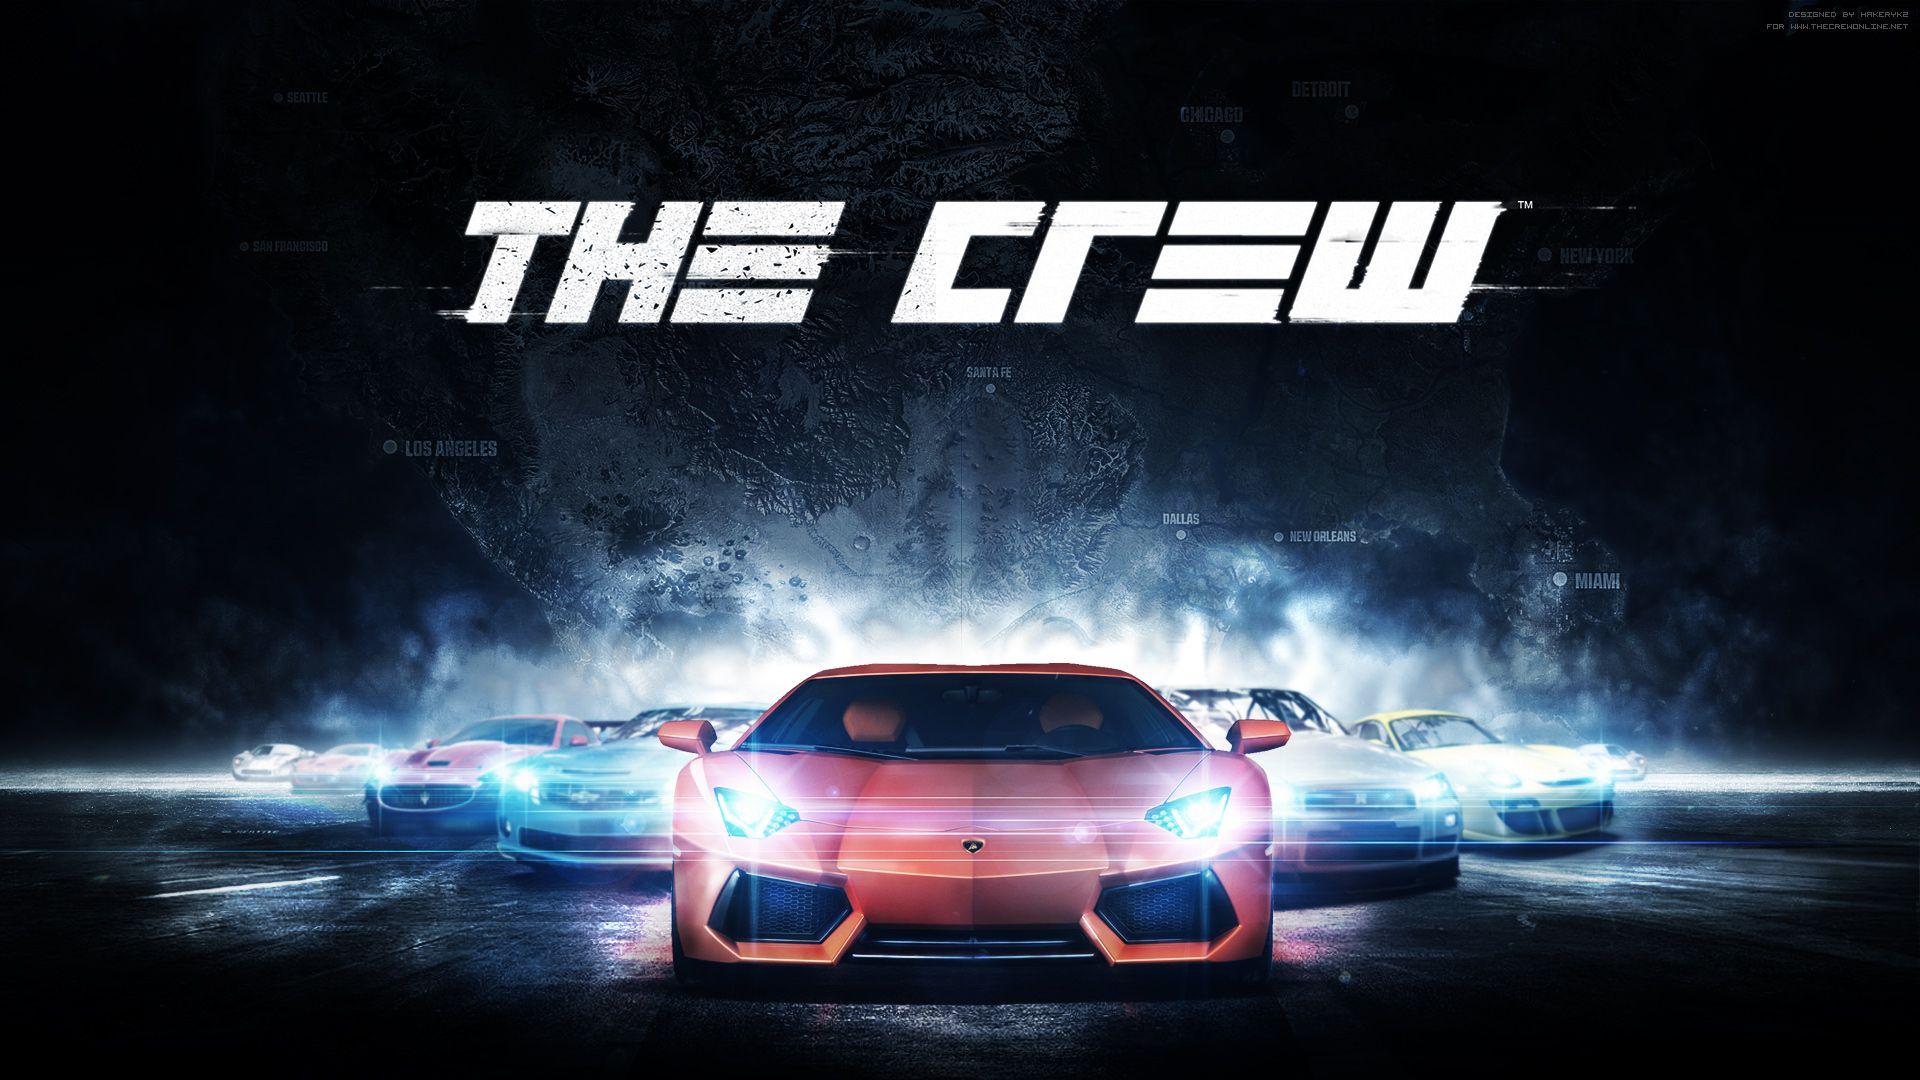 1136508 video games, night, vehicle, The Crew, darkness, screenshot,  computer wallpaper, pc game - Rare Gallery HD Wallpapers